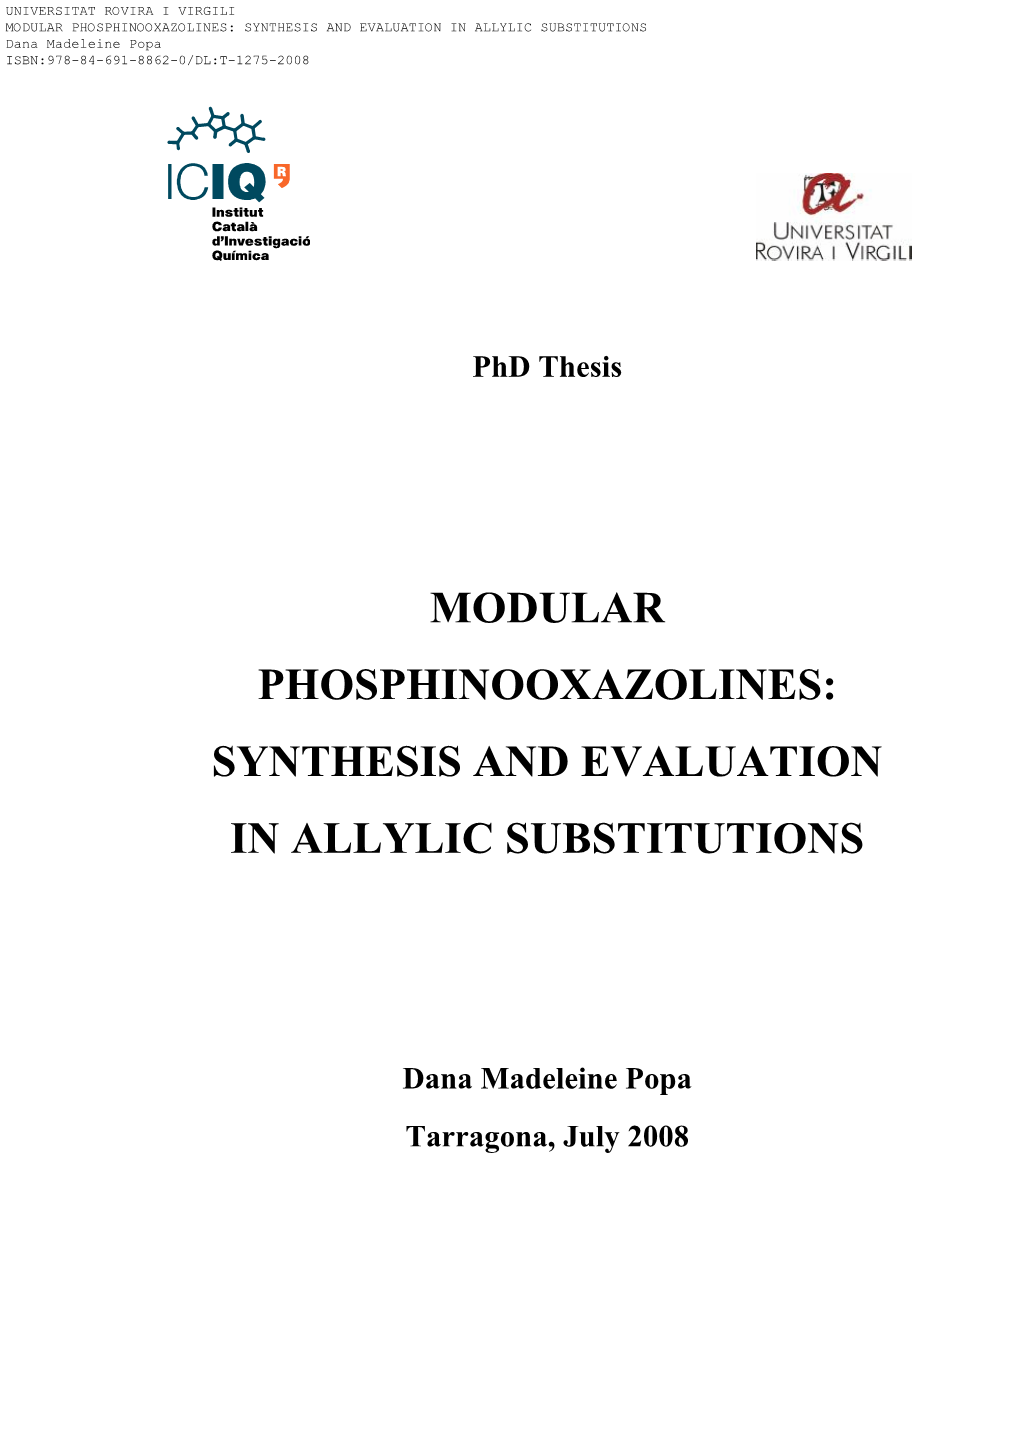 MODULAR PHOSPHINOOXAZOLINES: SYNTHESIS and EVALUATION in ALLYLIC SUBSTITUTIONS Dana Madeleine Popa ISBN:978-84-691-8862-0/DL:T-1275-2008